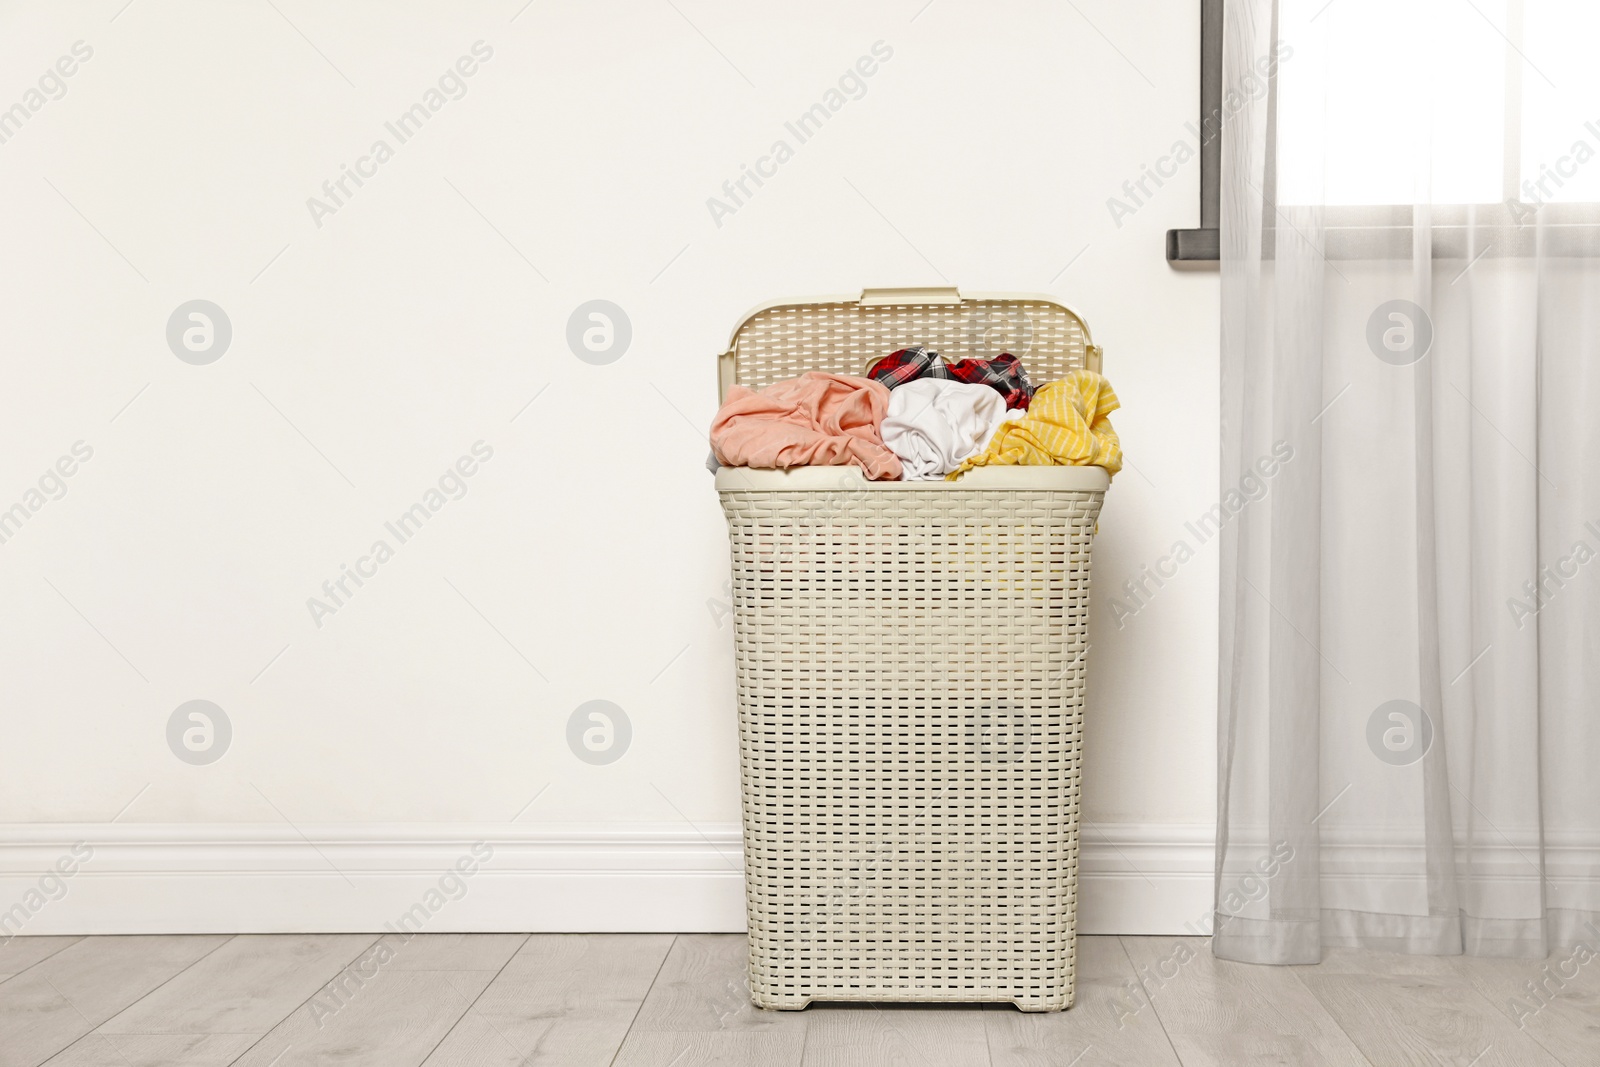 Photo of Plastic laundry basket full of dirty clothes on floor near light wall in room. Space for text